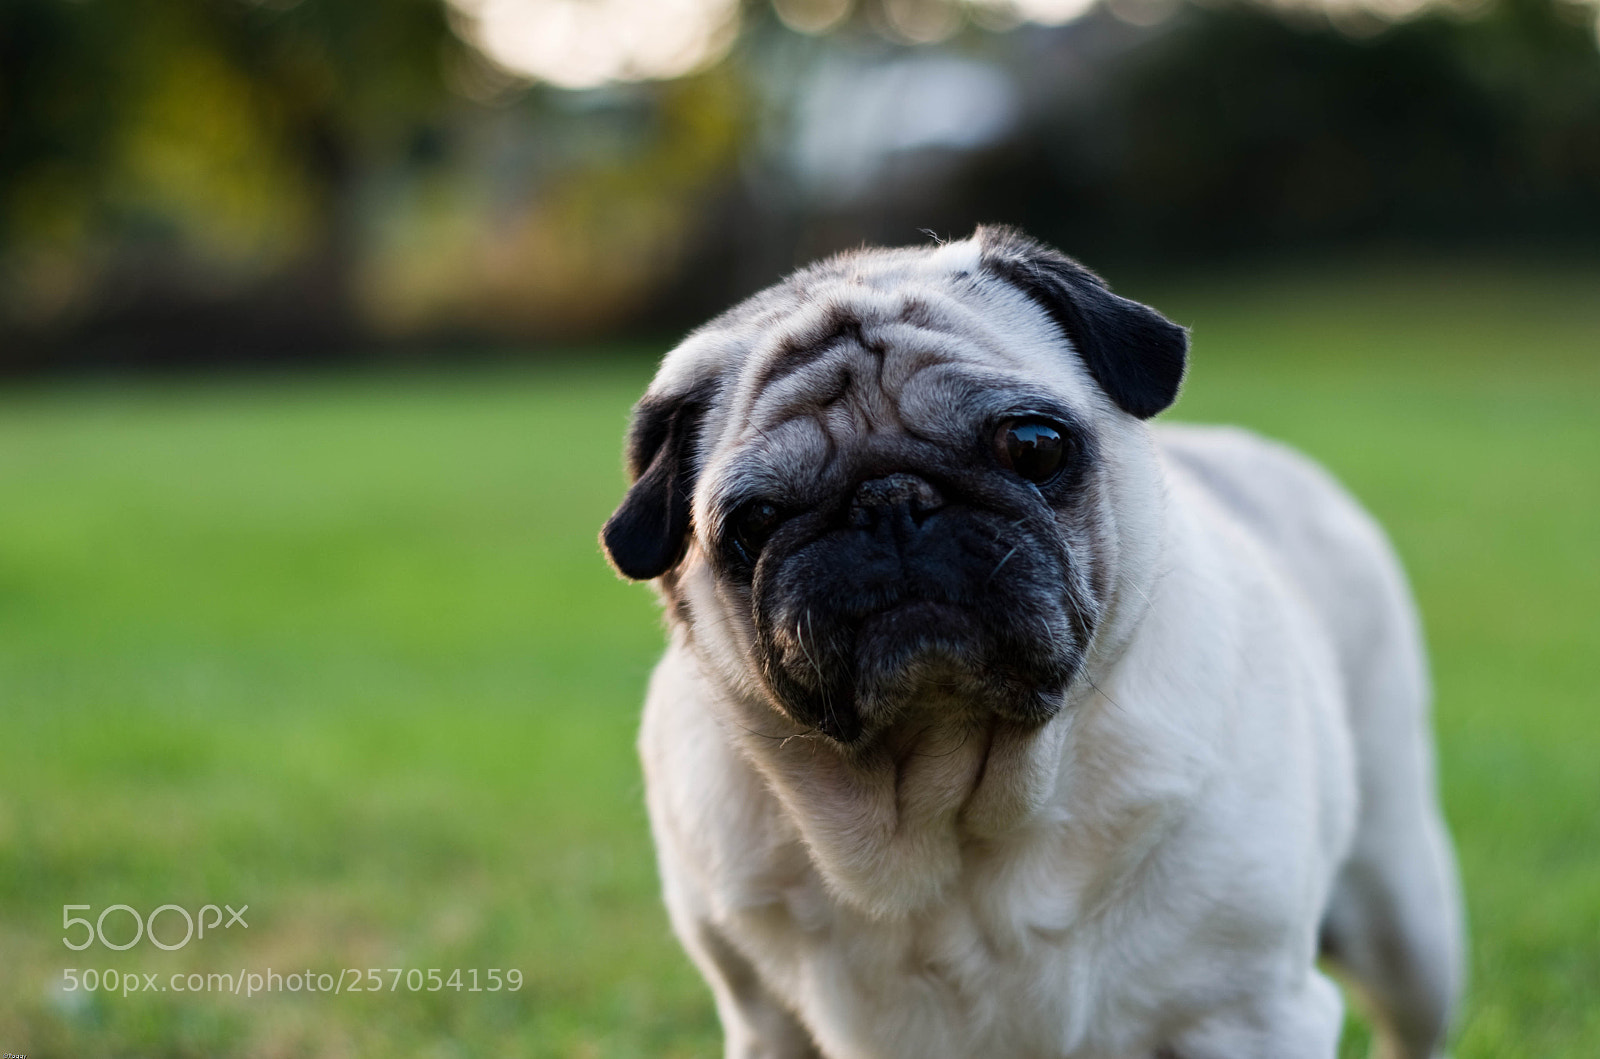 Pentax K-50 sample photo. Cannelle the pug (mopshond) photography